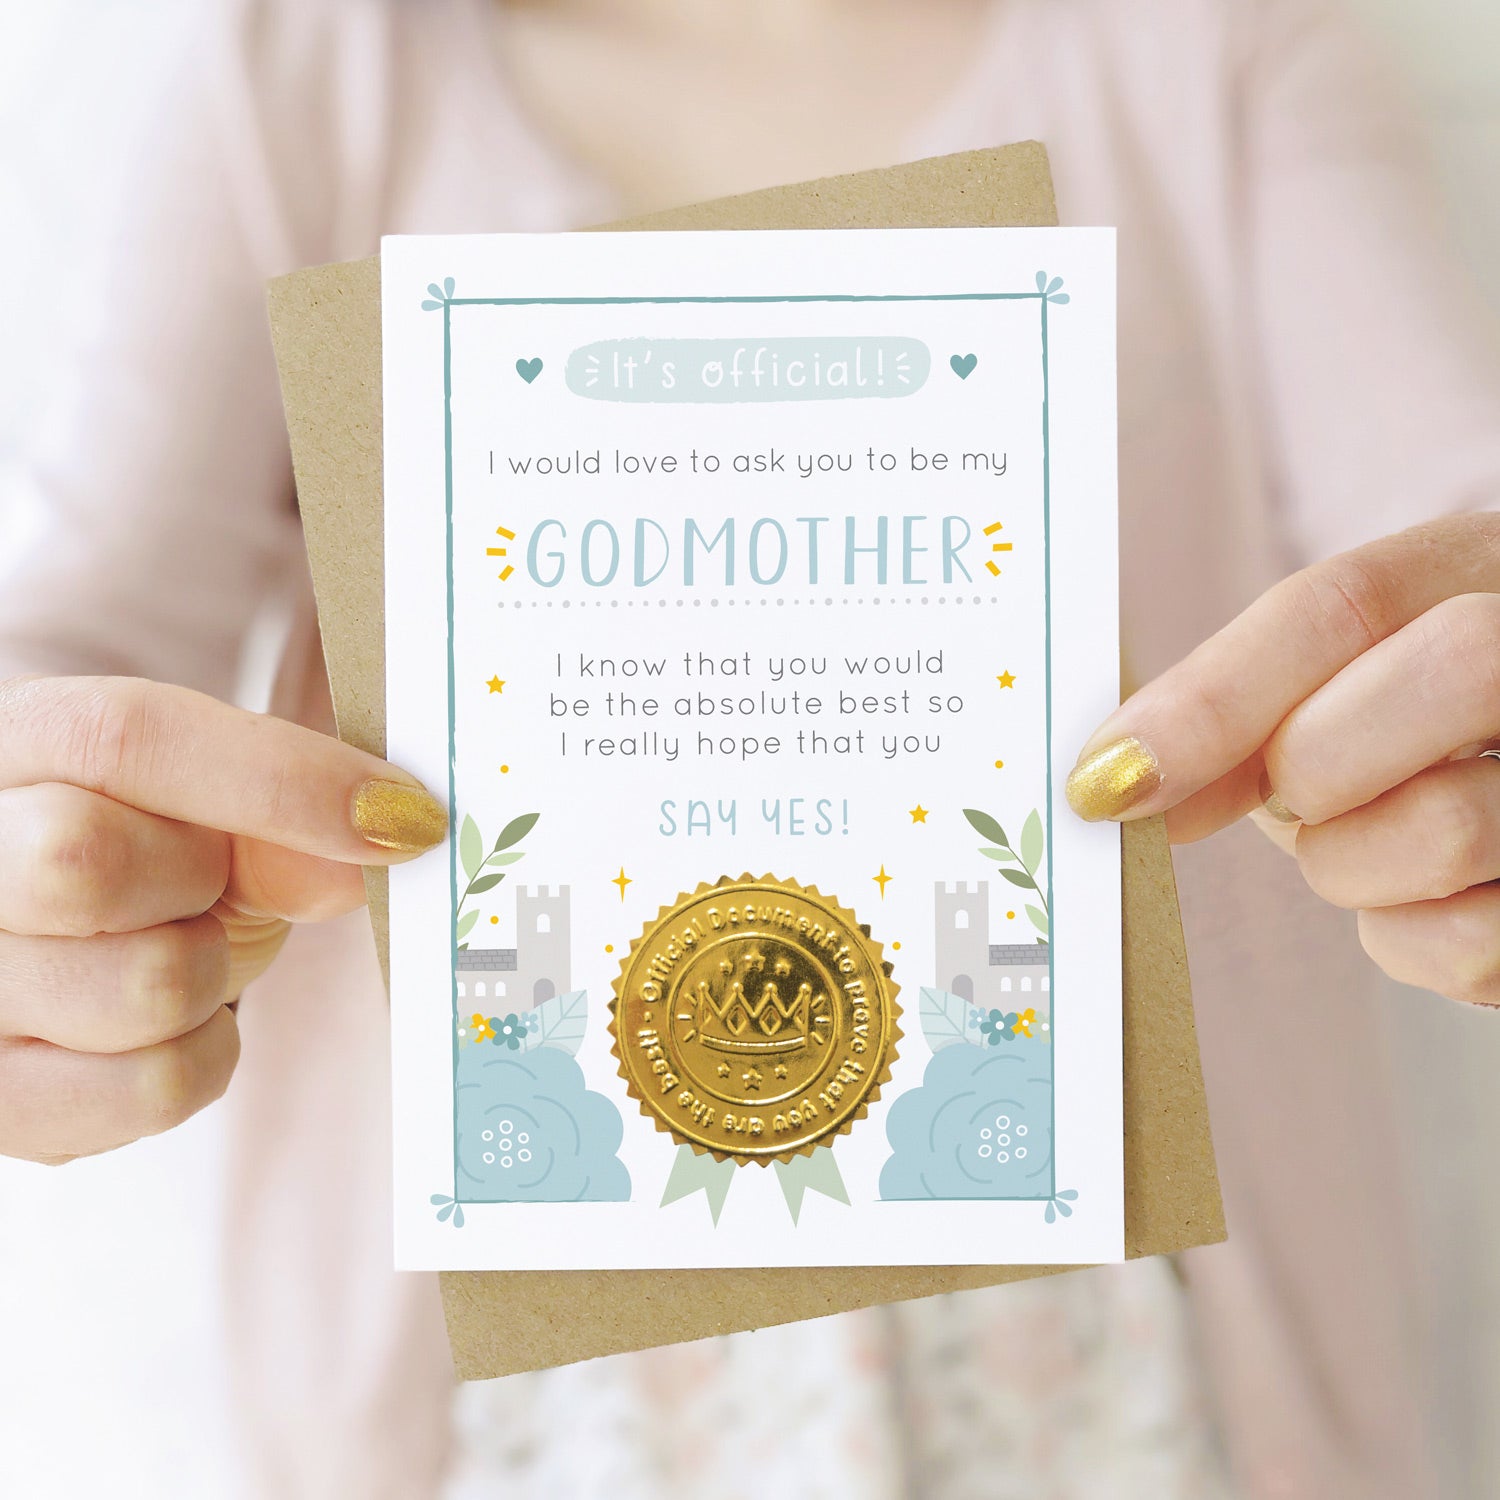 A will you be my godmother card in blue being held by both hands in front of a person wearing a pink cardigan and a white dress.